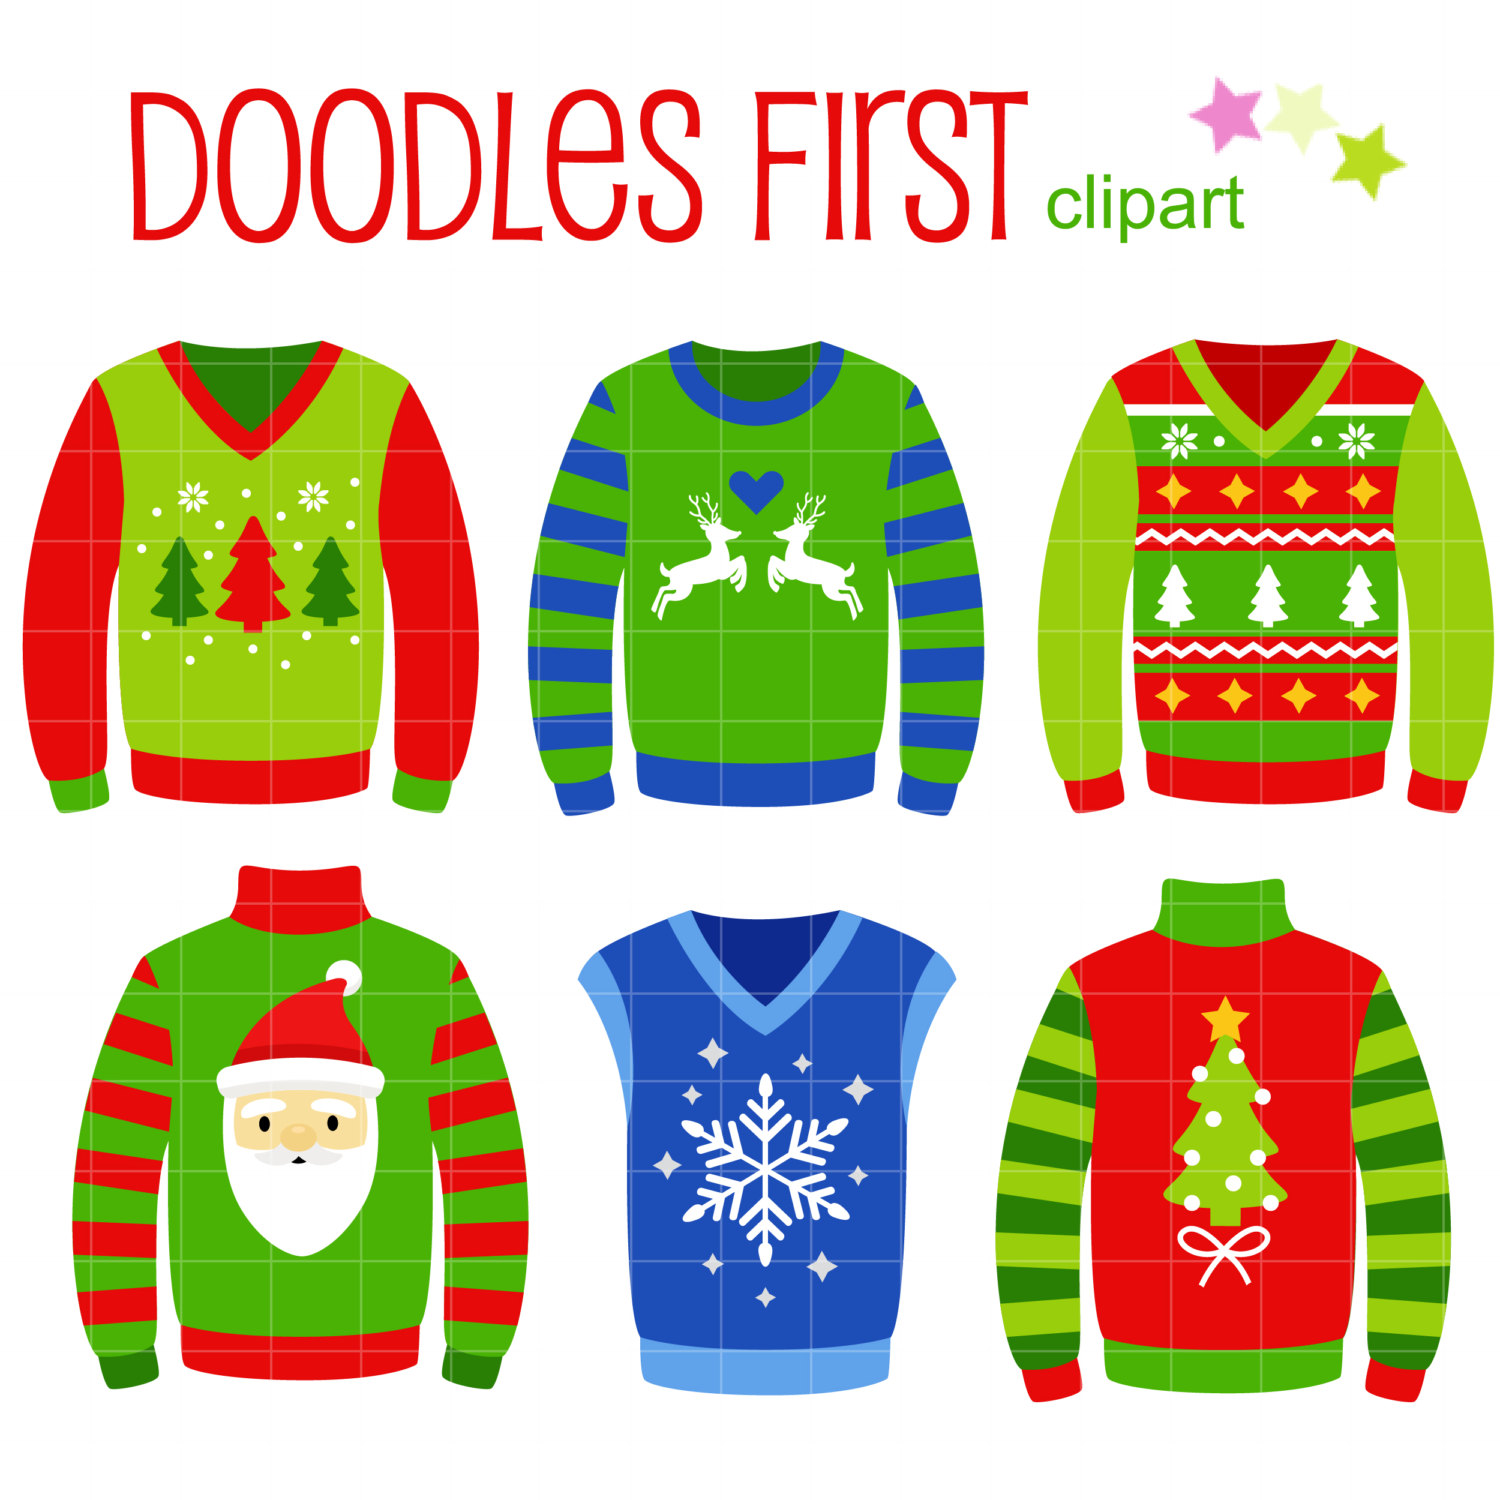 Ugly Christmas Sweaters Digital Clip Art For By Doodlesfirst